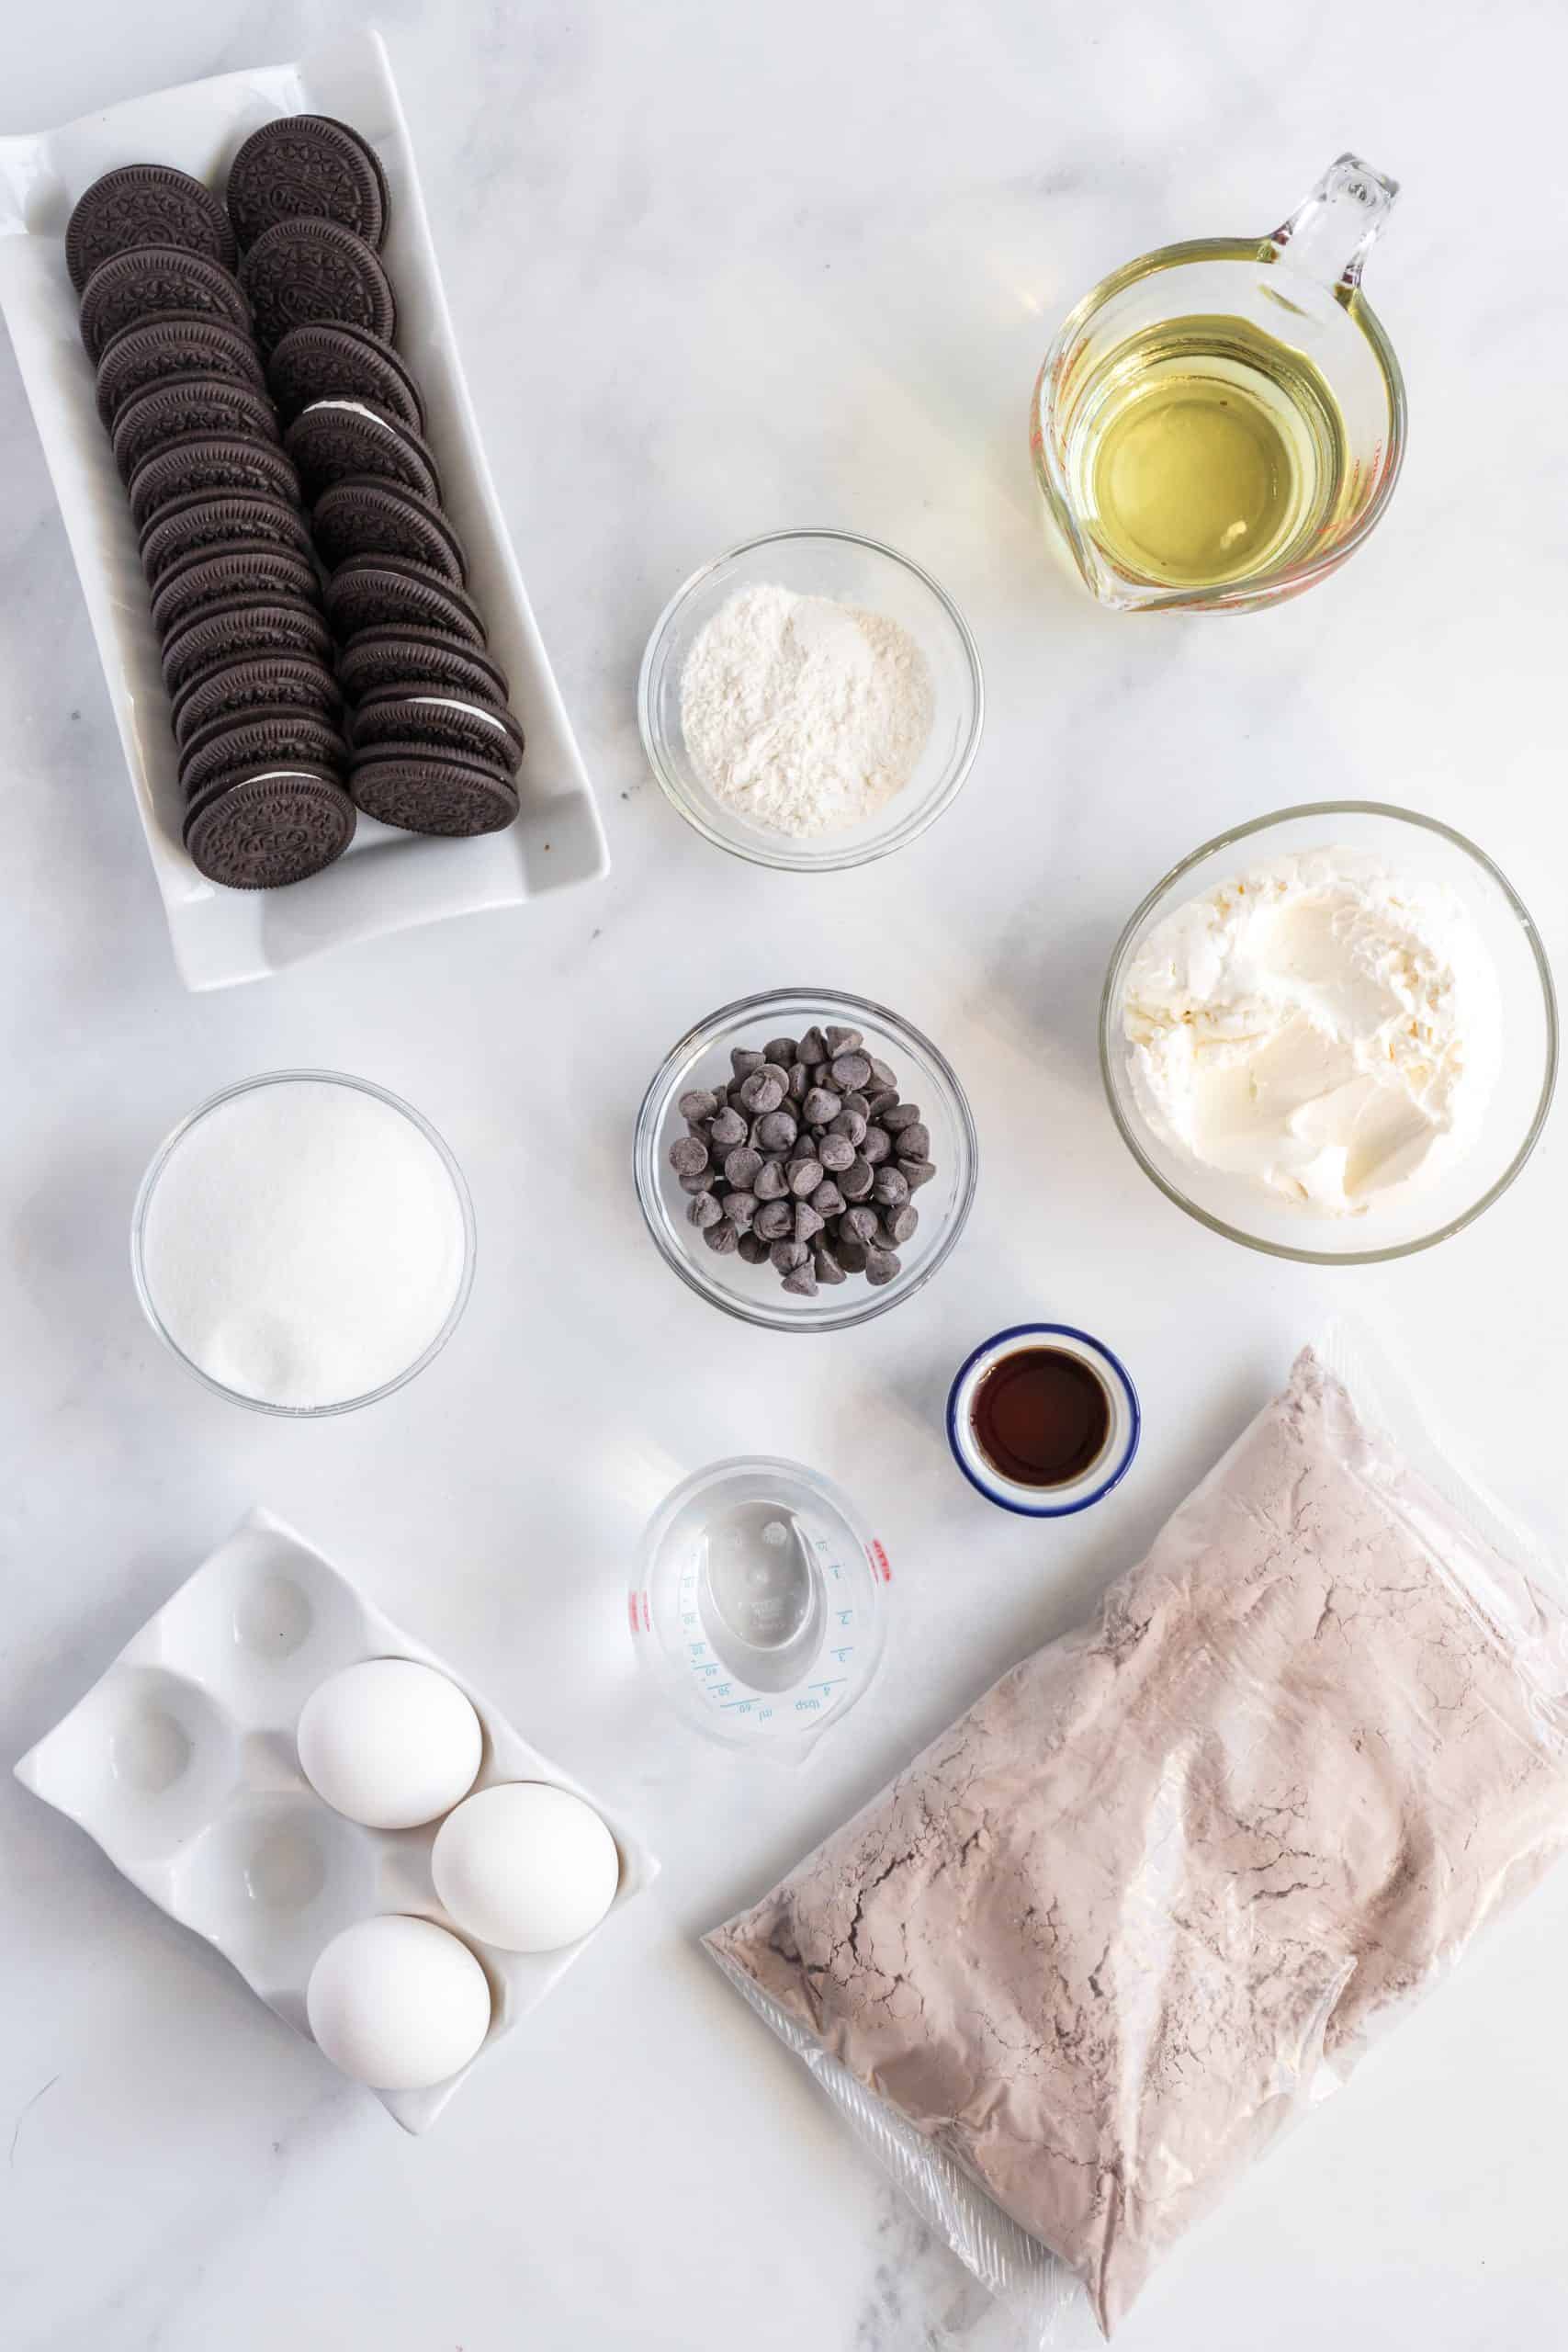 Ingredients needed brownie mix, oreos, cream cheese, sugar, vanilla extract, egg, all-purpose flour and chocolate chips.